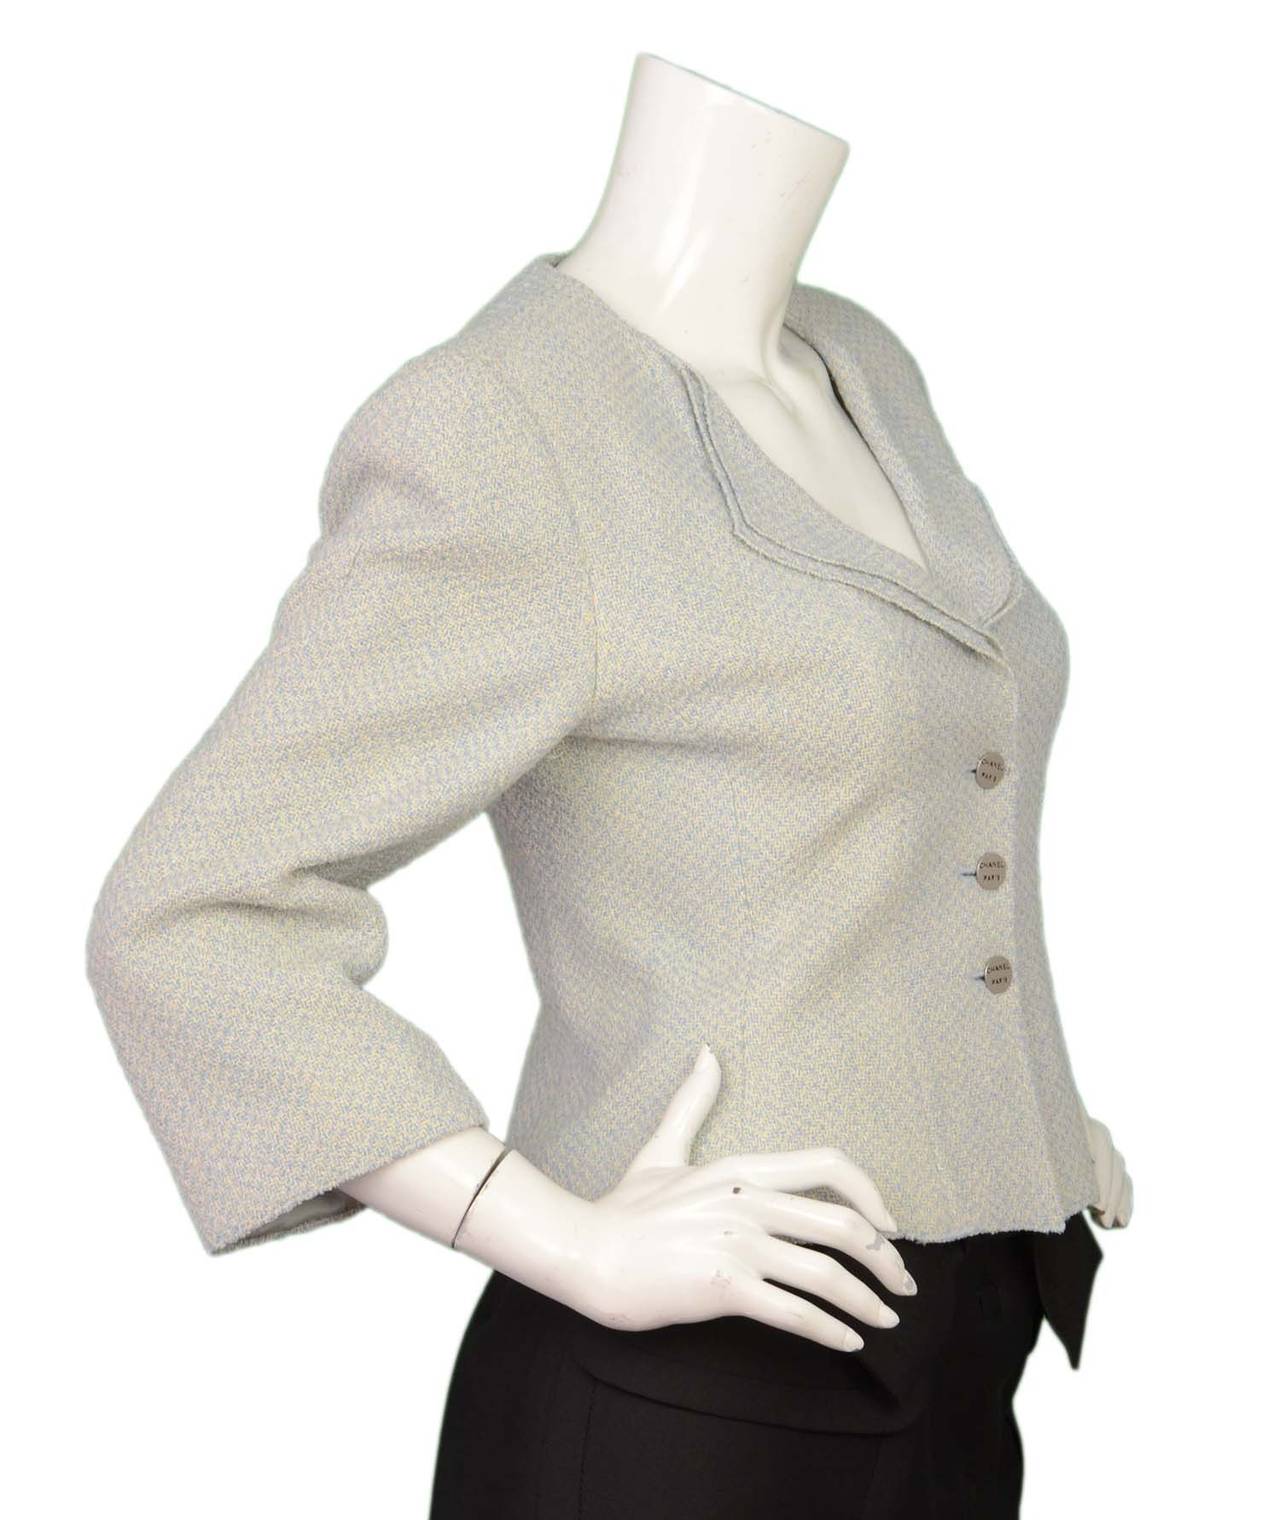 Chanel '00 Blue & White Tweed Cropped Blazer
Features silvertone buttons with 